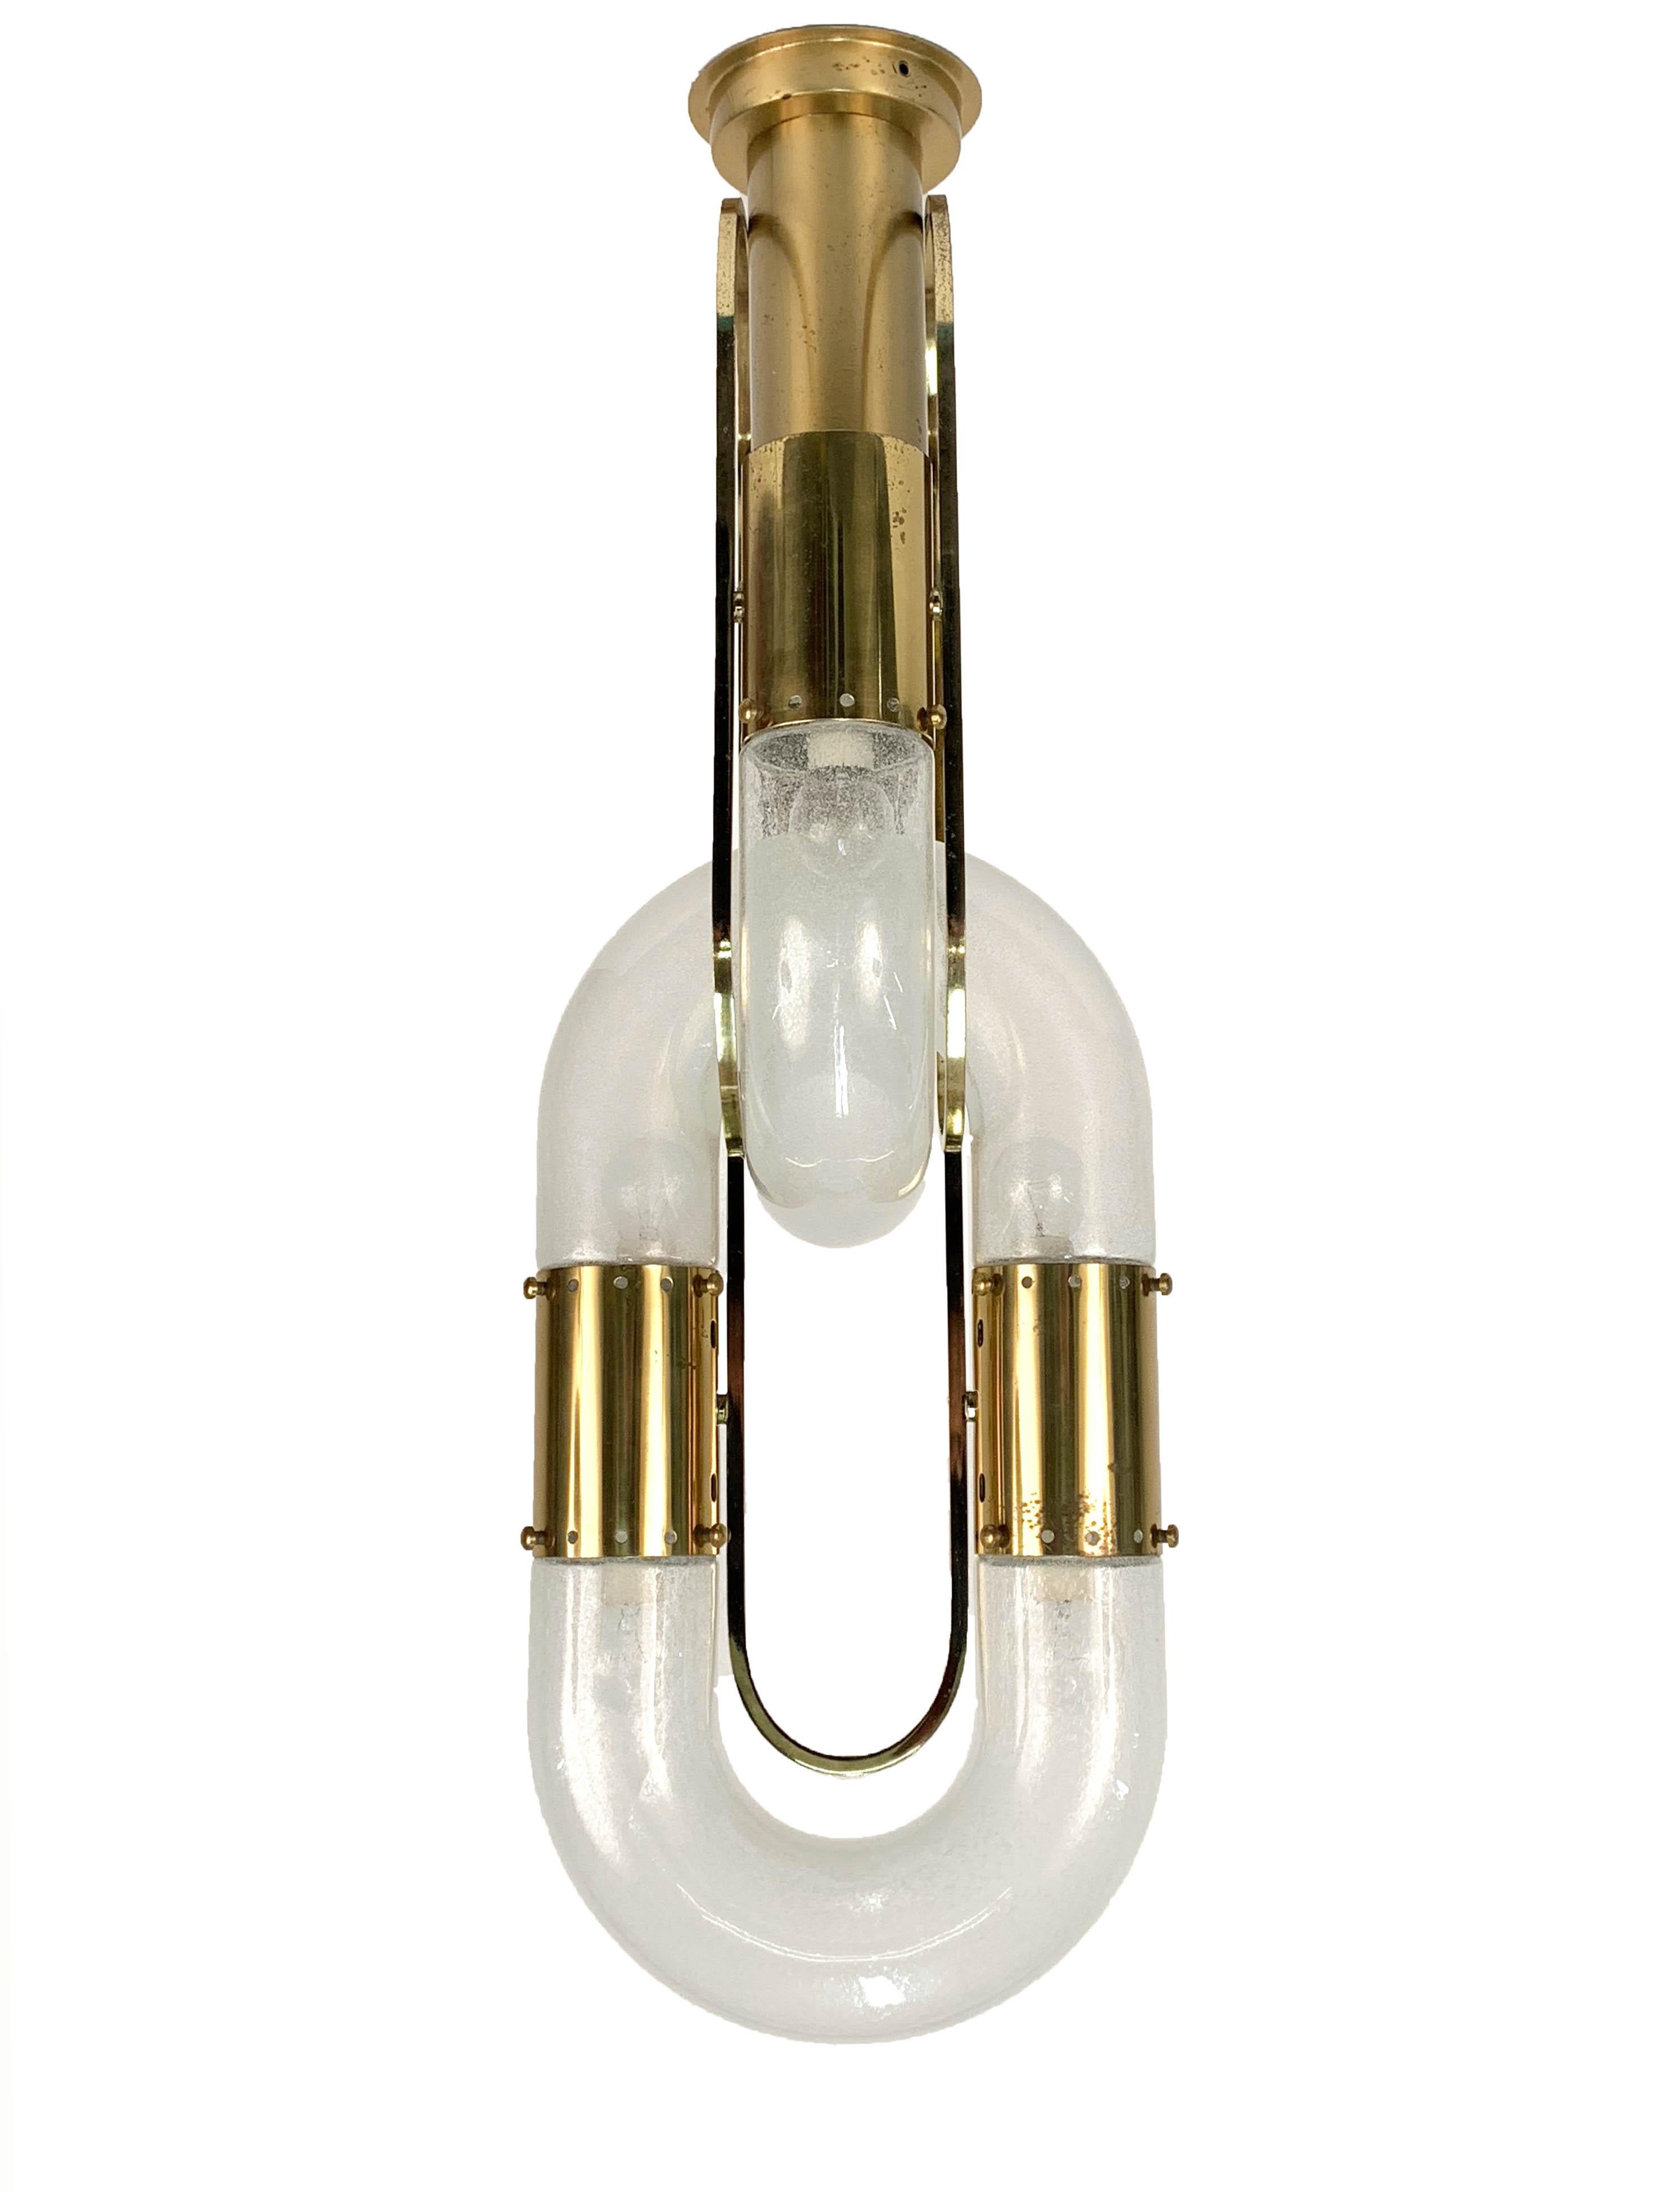 Unique midcentury brass and frosted Murano glass chandelier. Designed by Aldo Nason for a Mazzega Italian production of the 1970s.

The elegant lines of the two main elements are crossed like links of a chain. The item can be used as a chandelier